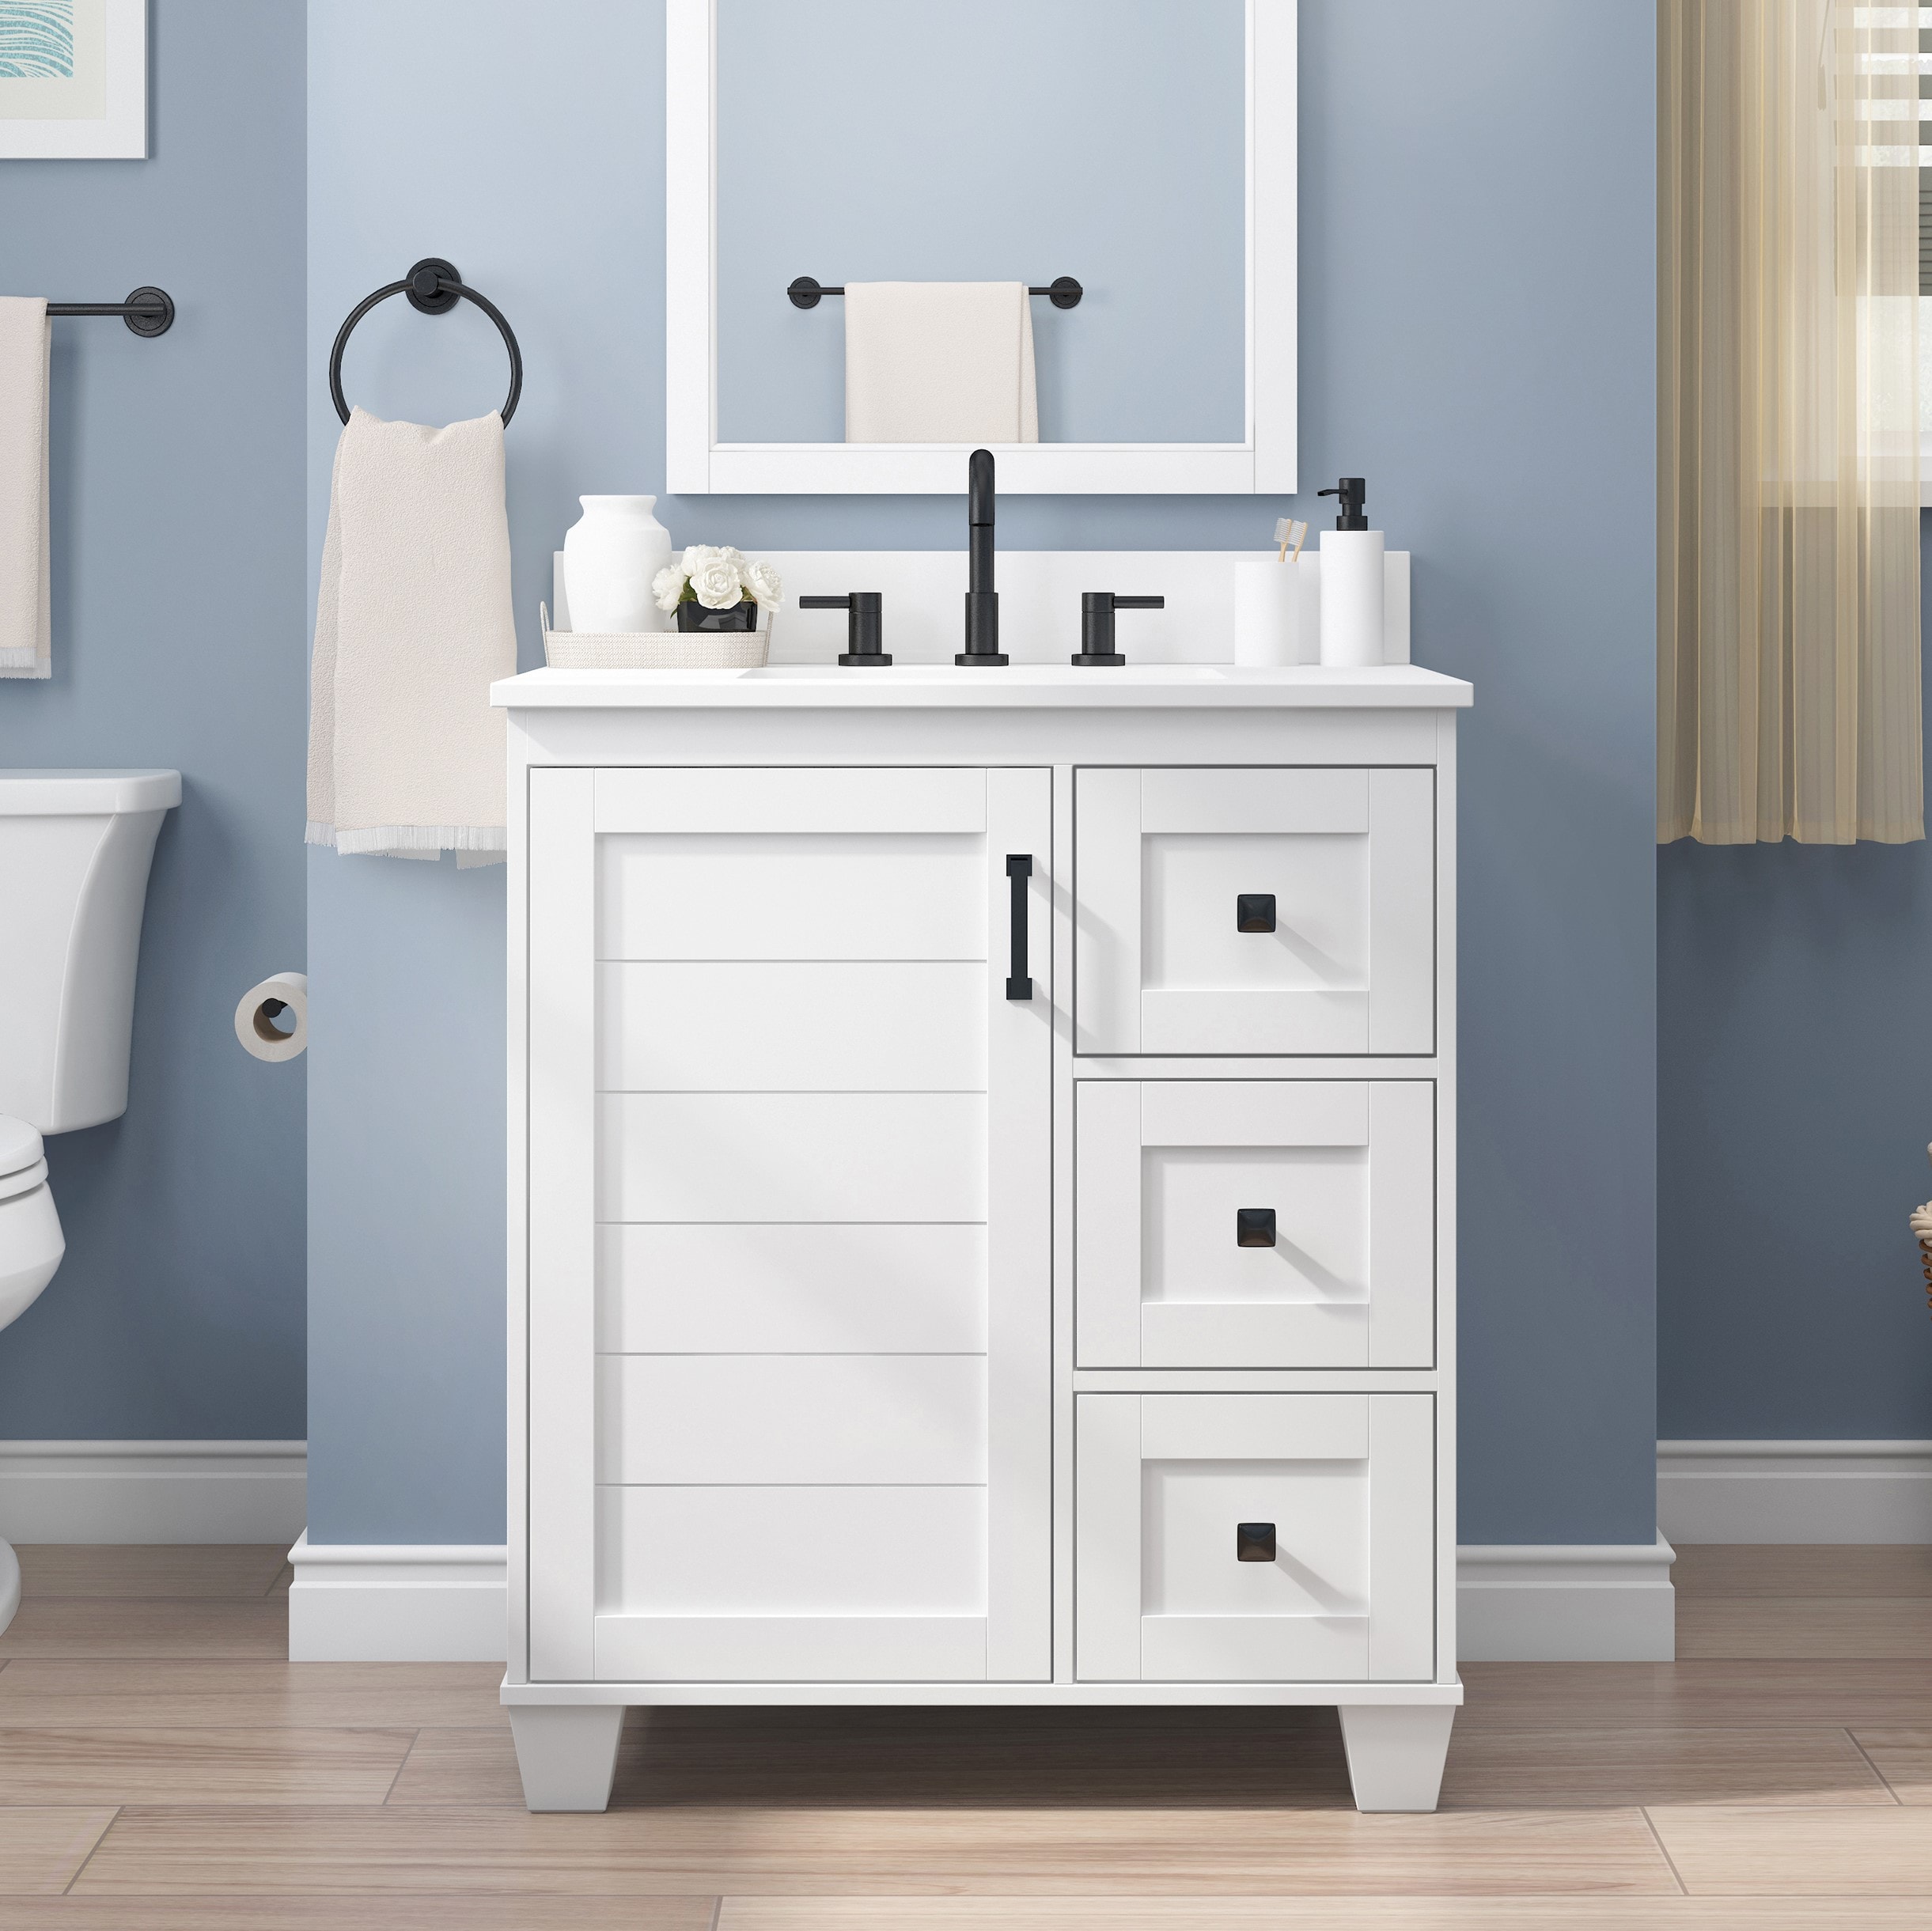 allen + roth rigsby 30-in white undermount single sink bathroom vanity with  white engineered marble top